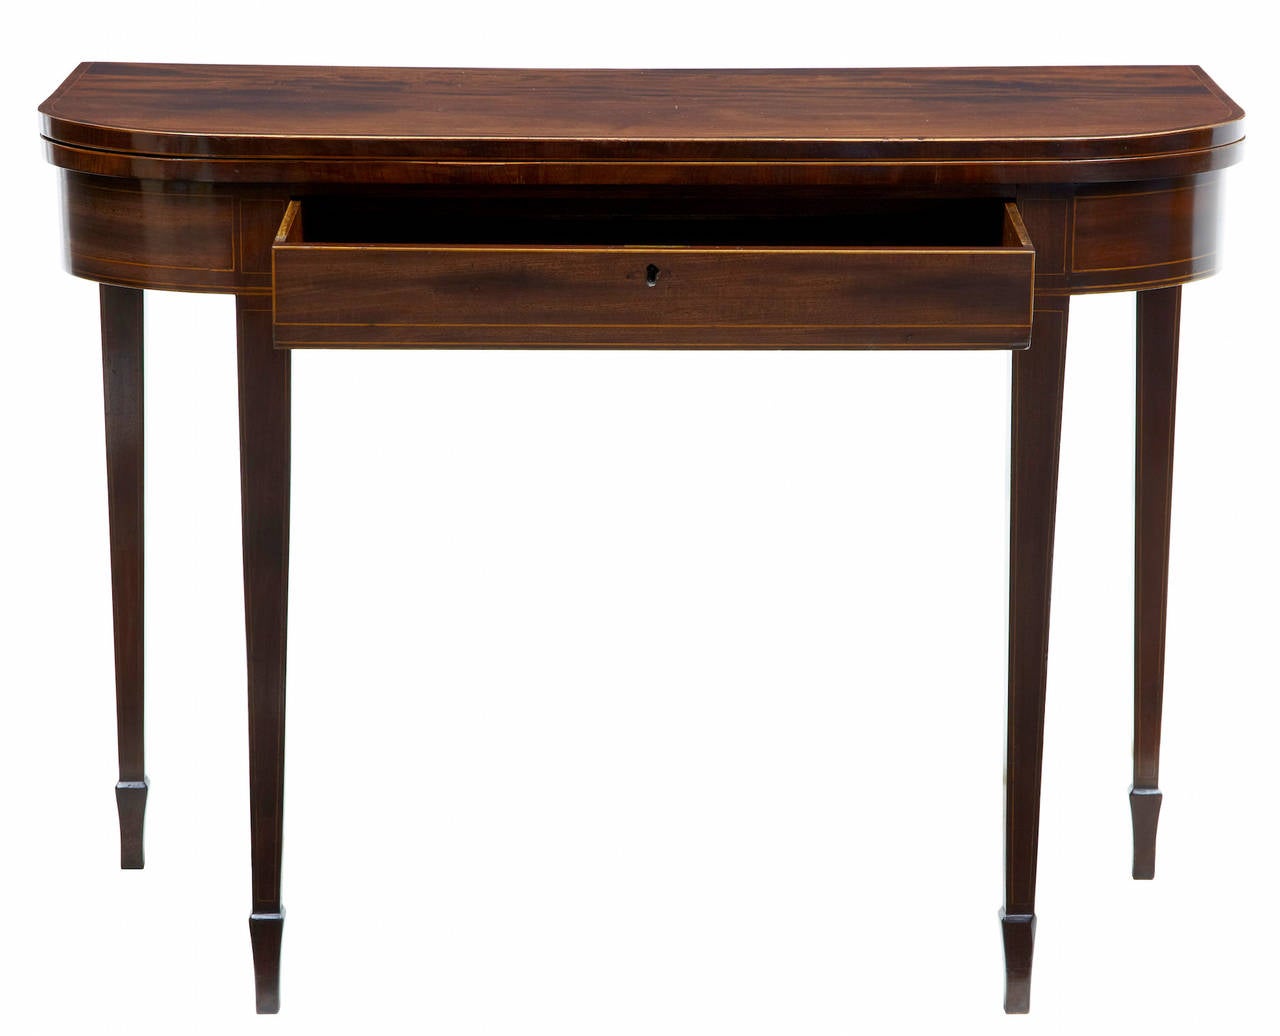 Late George III mahogany tea table, circa 1810. 

Good color and patina, inlaid and strung top. Single drawer to the front. 

Standing on tapered legs. 

Measures: Height 29 1/2